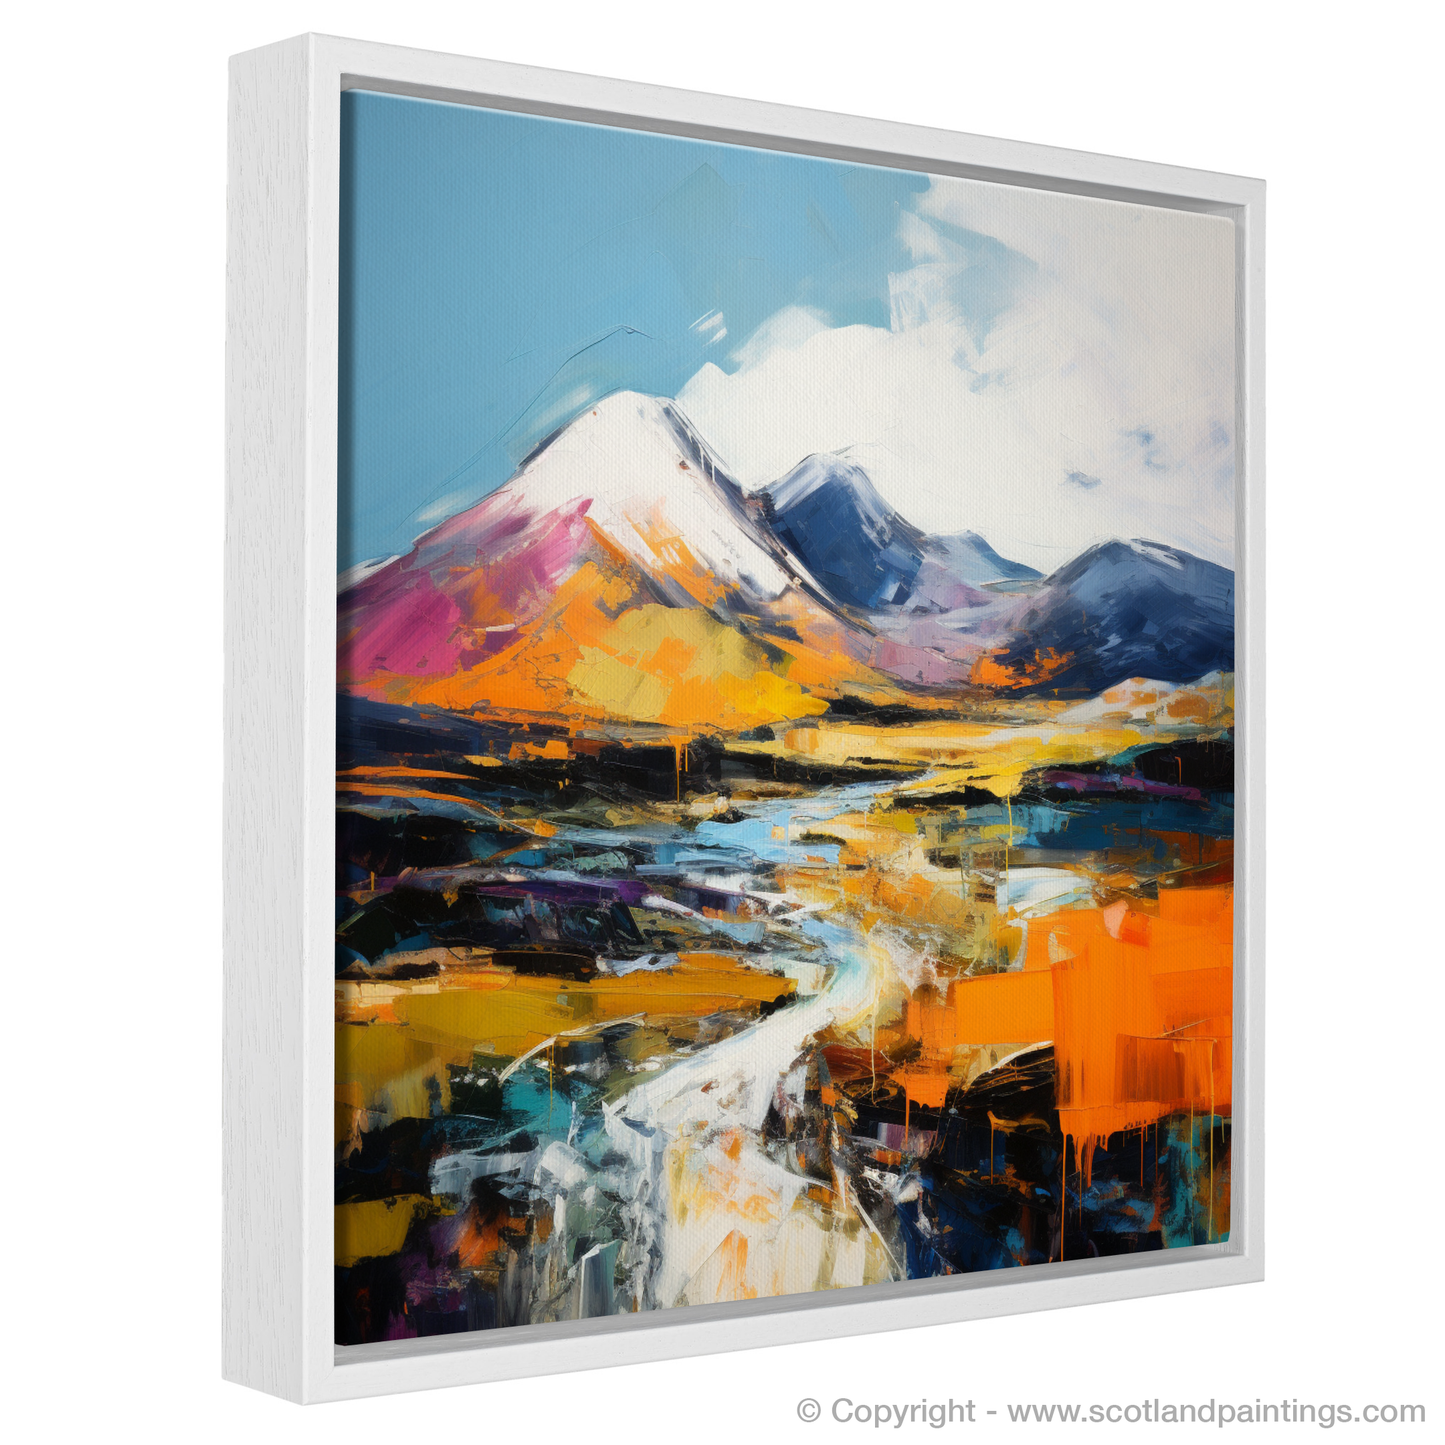 Painting and Art Print of Meall Corranaich. Meall Corranaich Unleashed: An Expressionist Ode to Scottish Munros.